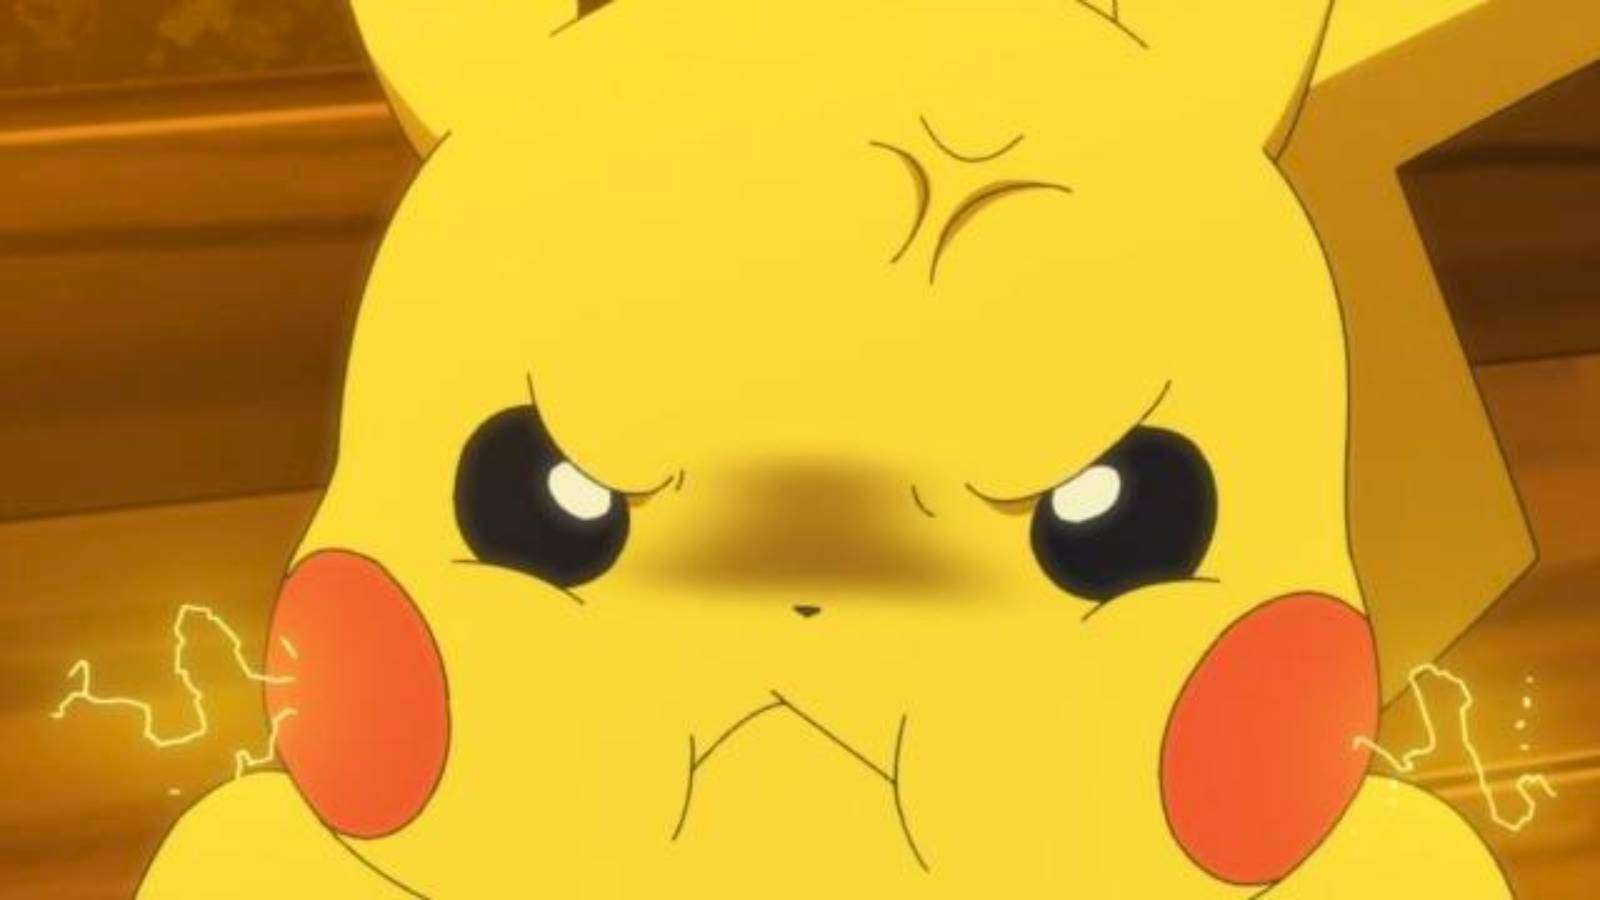 The Pokemon Pikachu being angry.